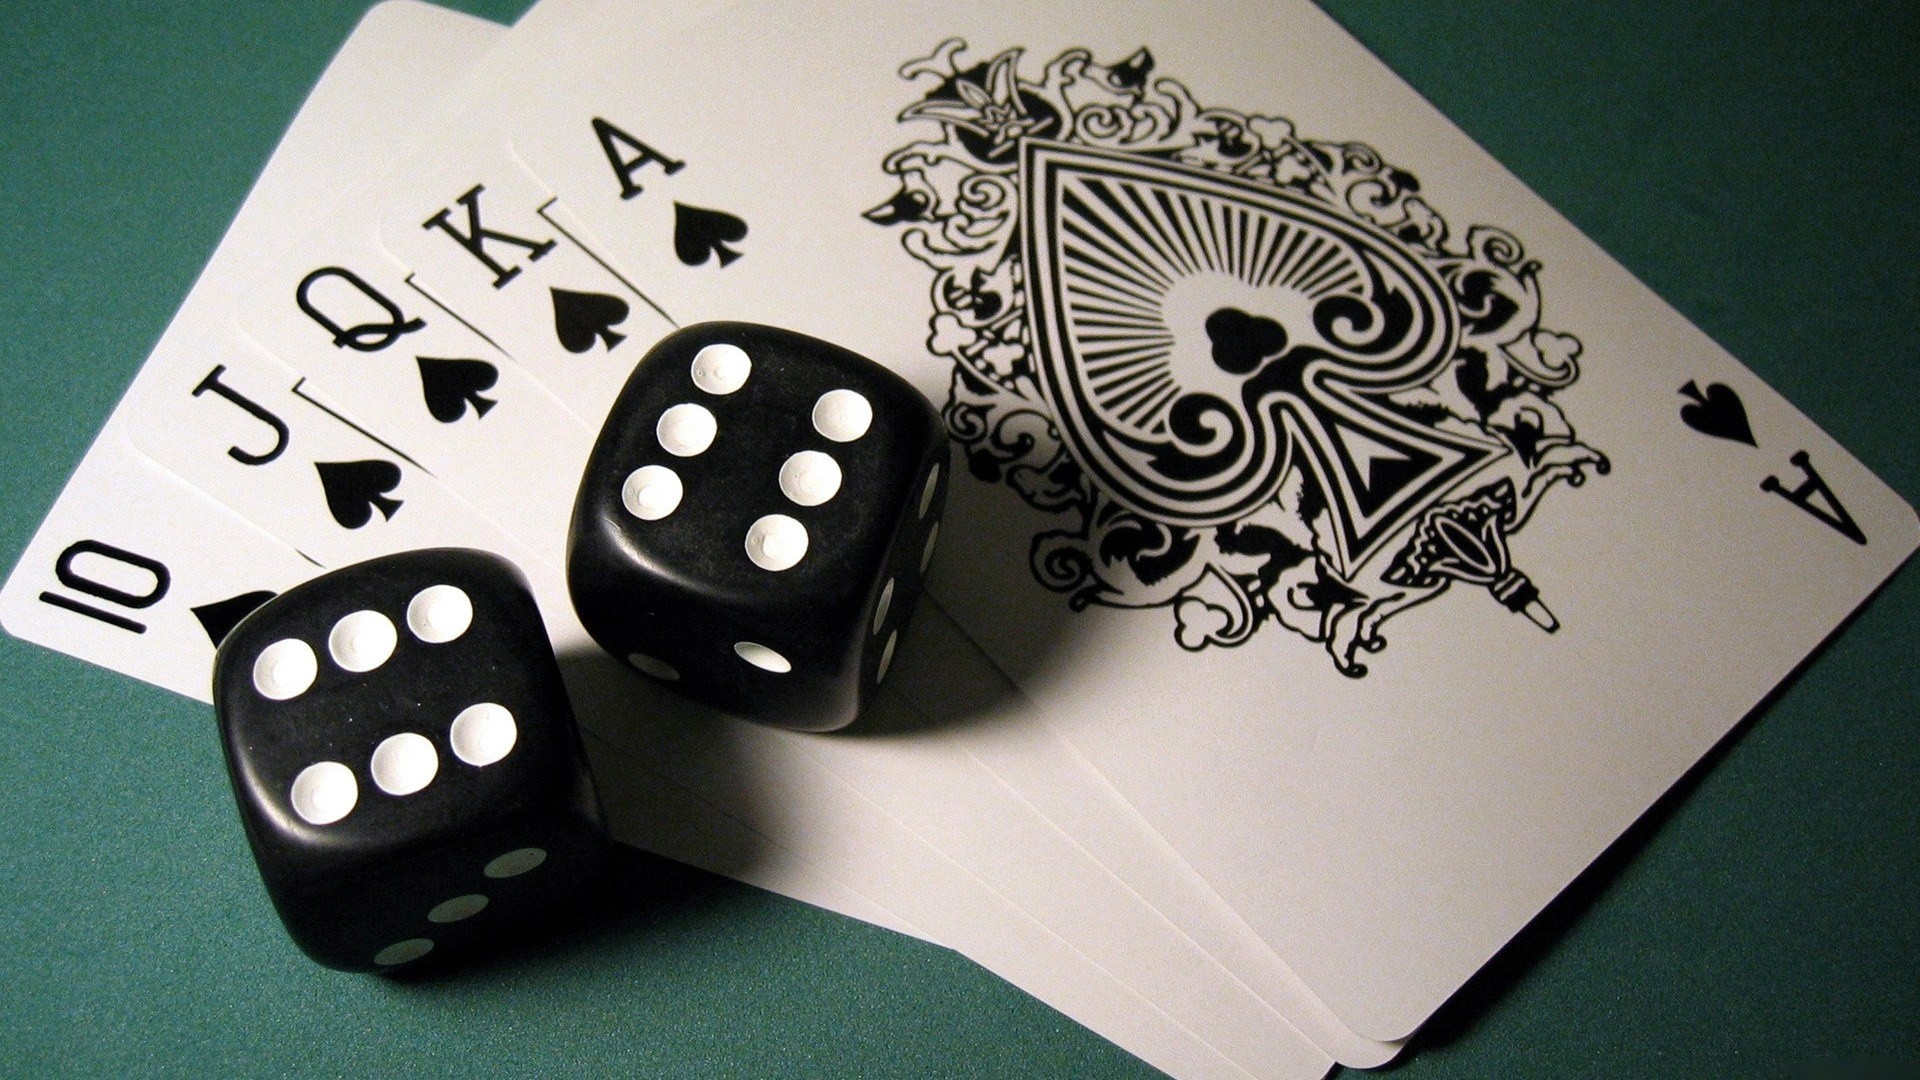 Love Playing Cards And Dice Wallpaper HD Wallpaper with 1920x1080 1920x1080